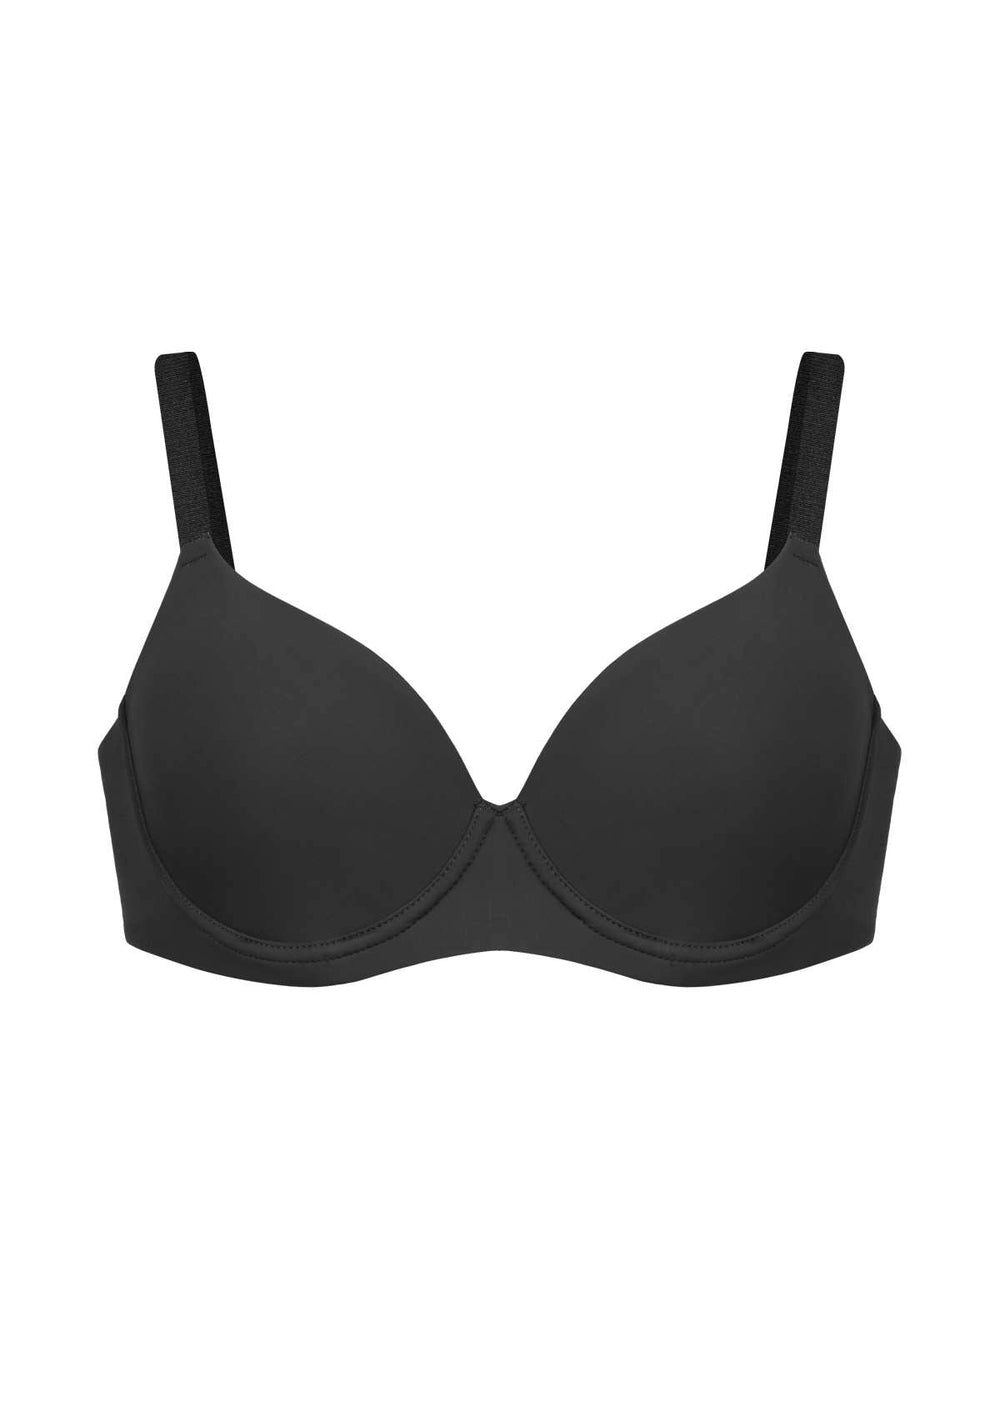 Woman Within - Play it cool. Our new T-Shirt Bras have smooth